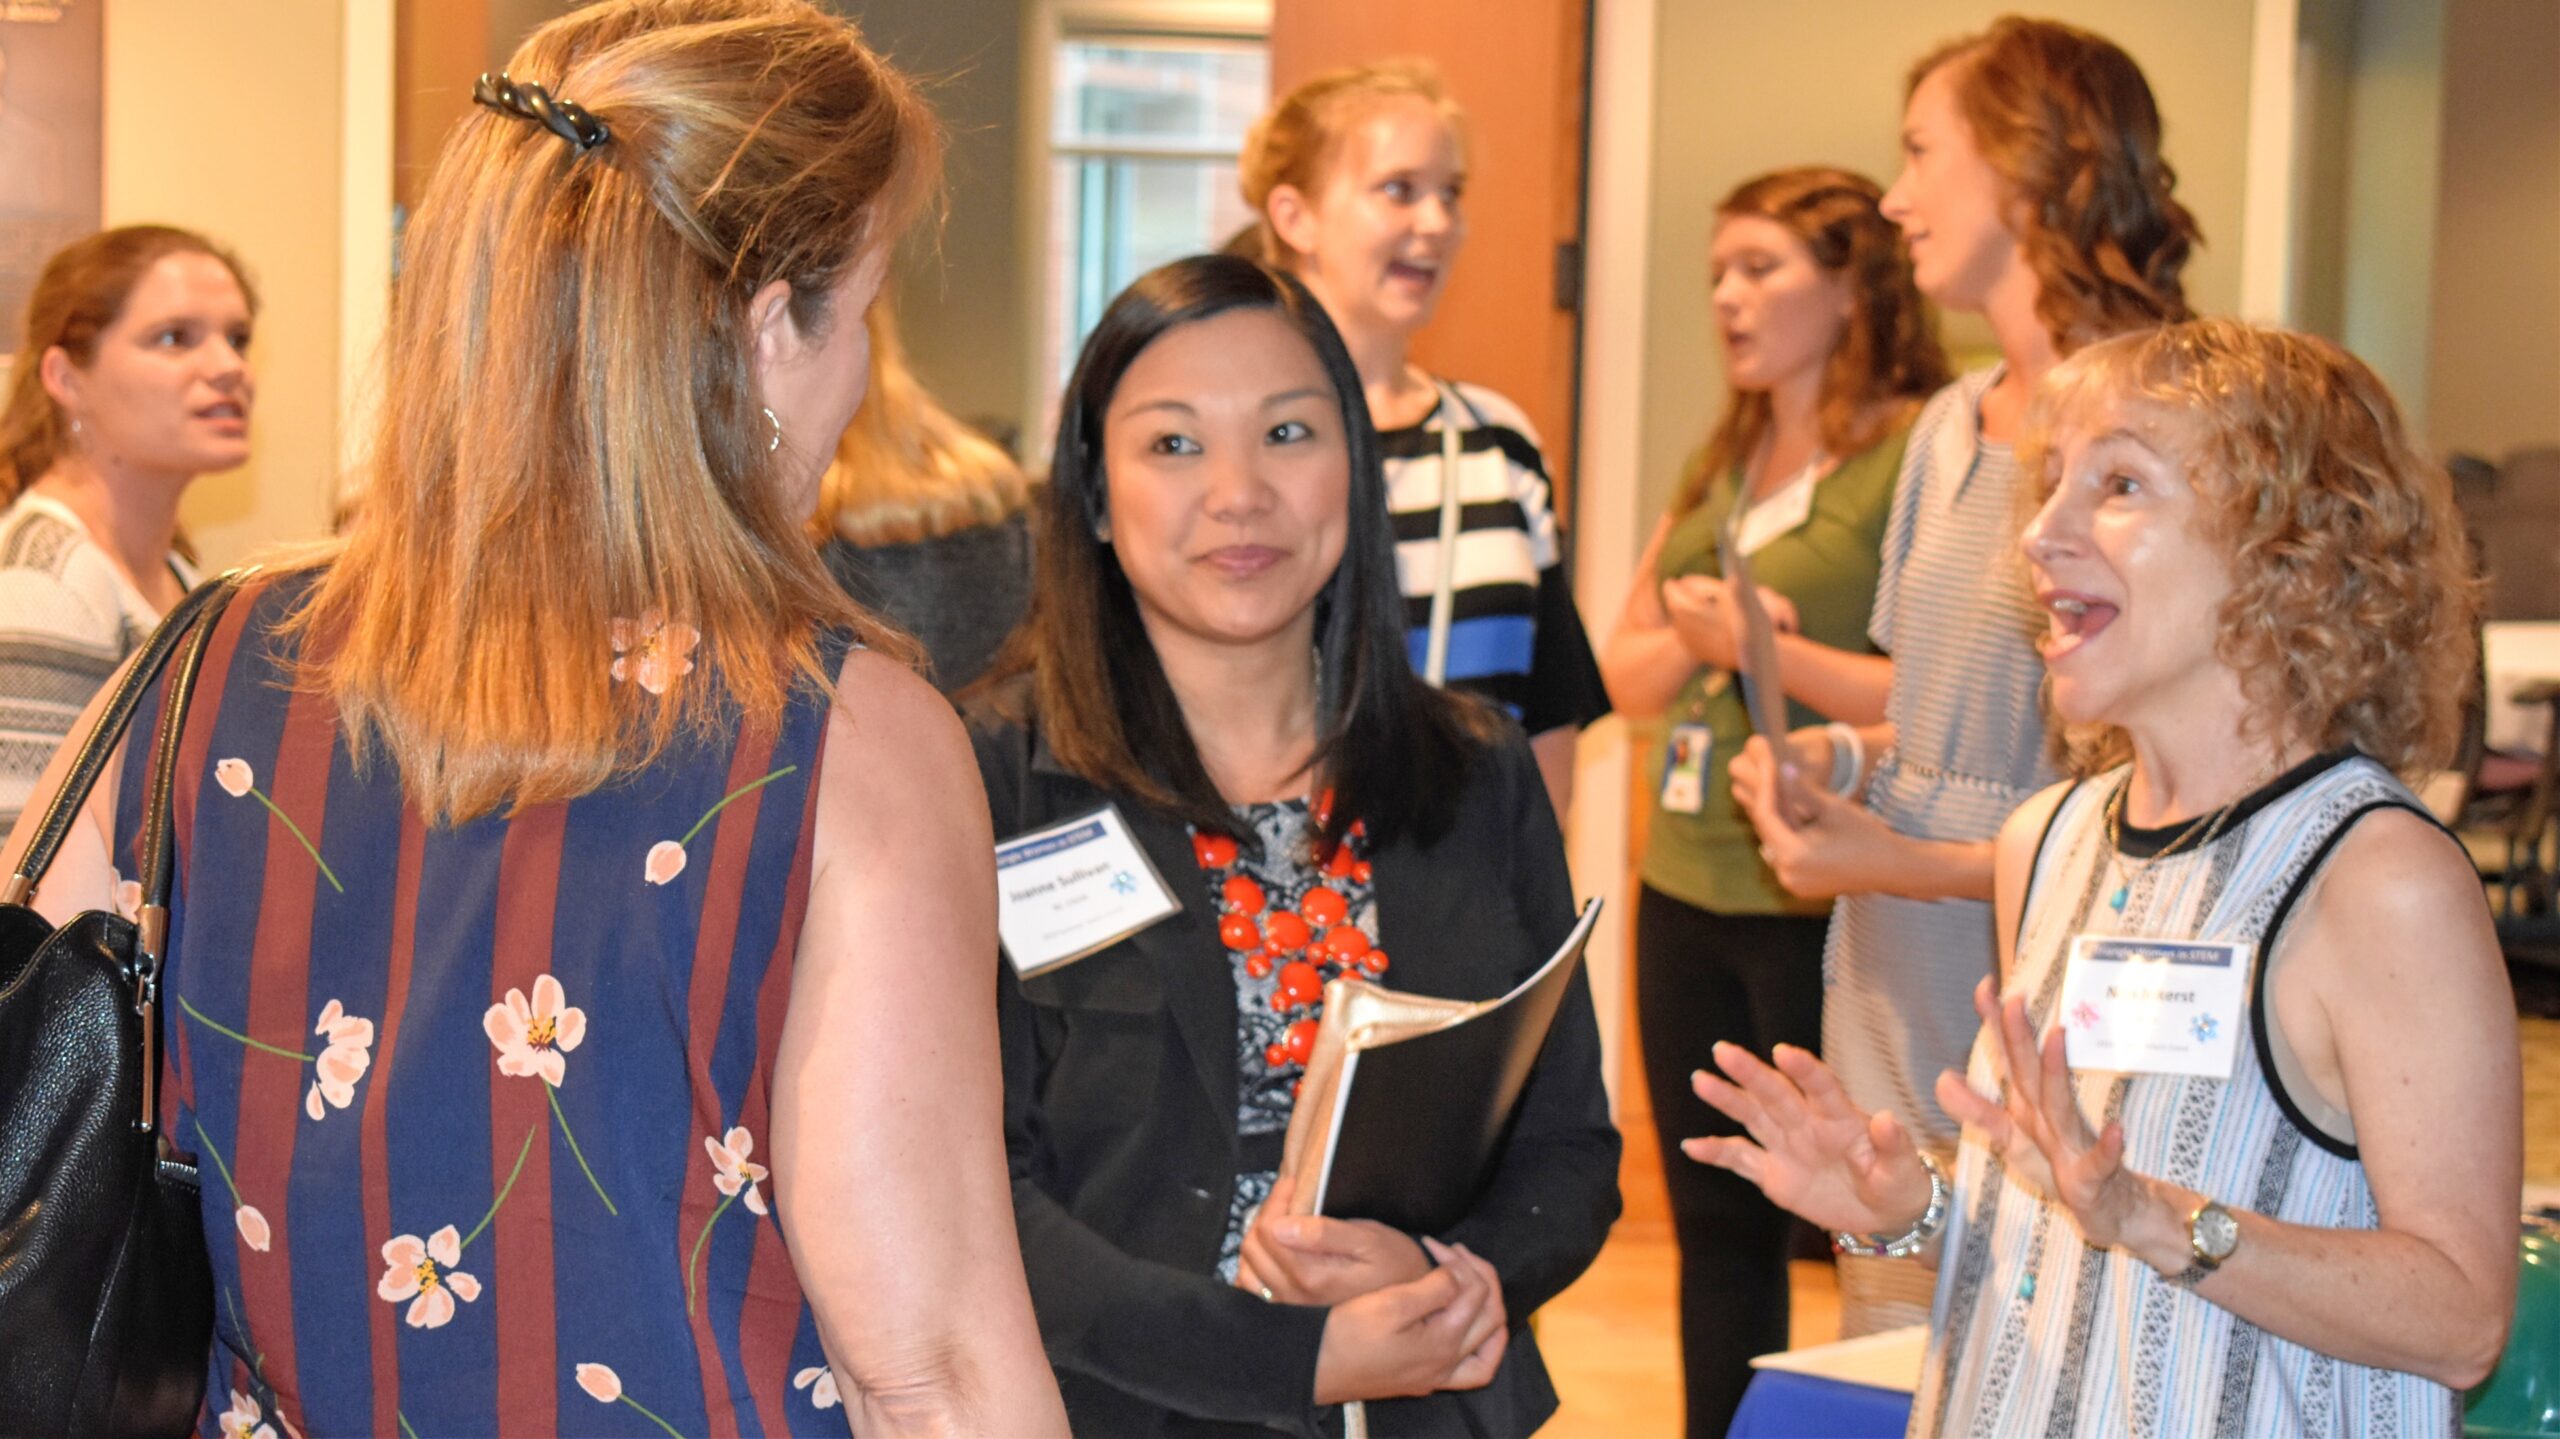 Duke Engineering hosted a "Talk & Tour" for 70 Triangle Women in STEM summer interns